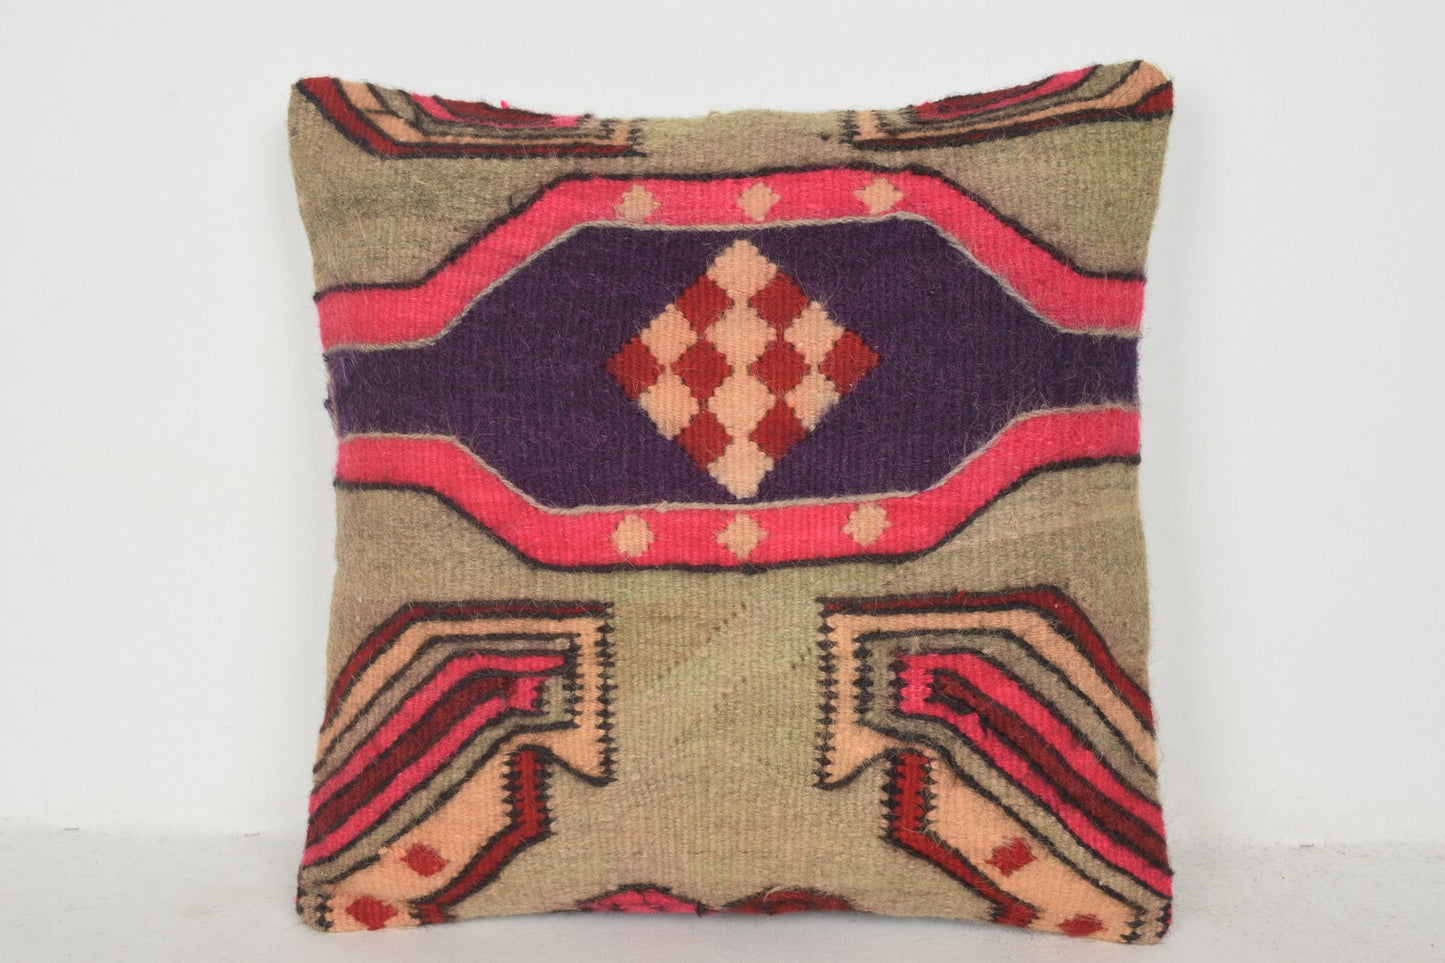 Vintage Kilim Rugs London Pillow B01143 20x20 Great Accessory Lace